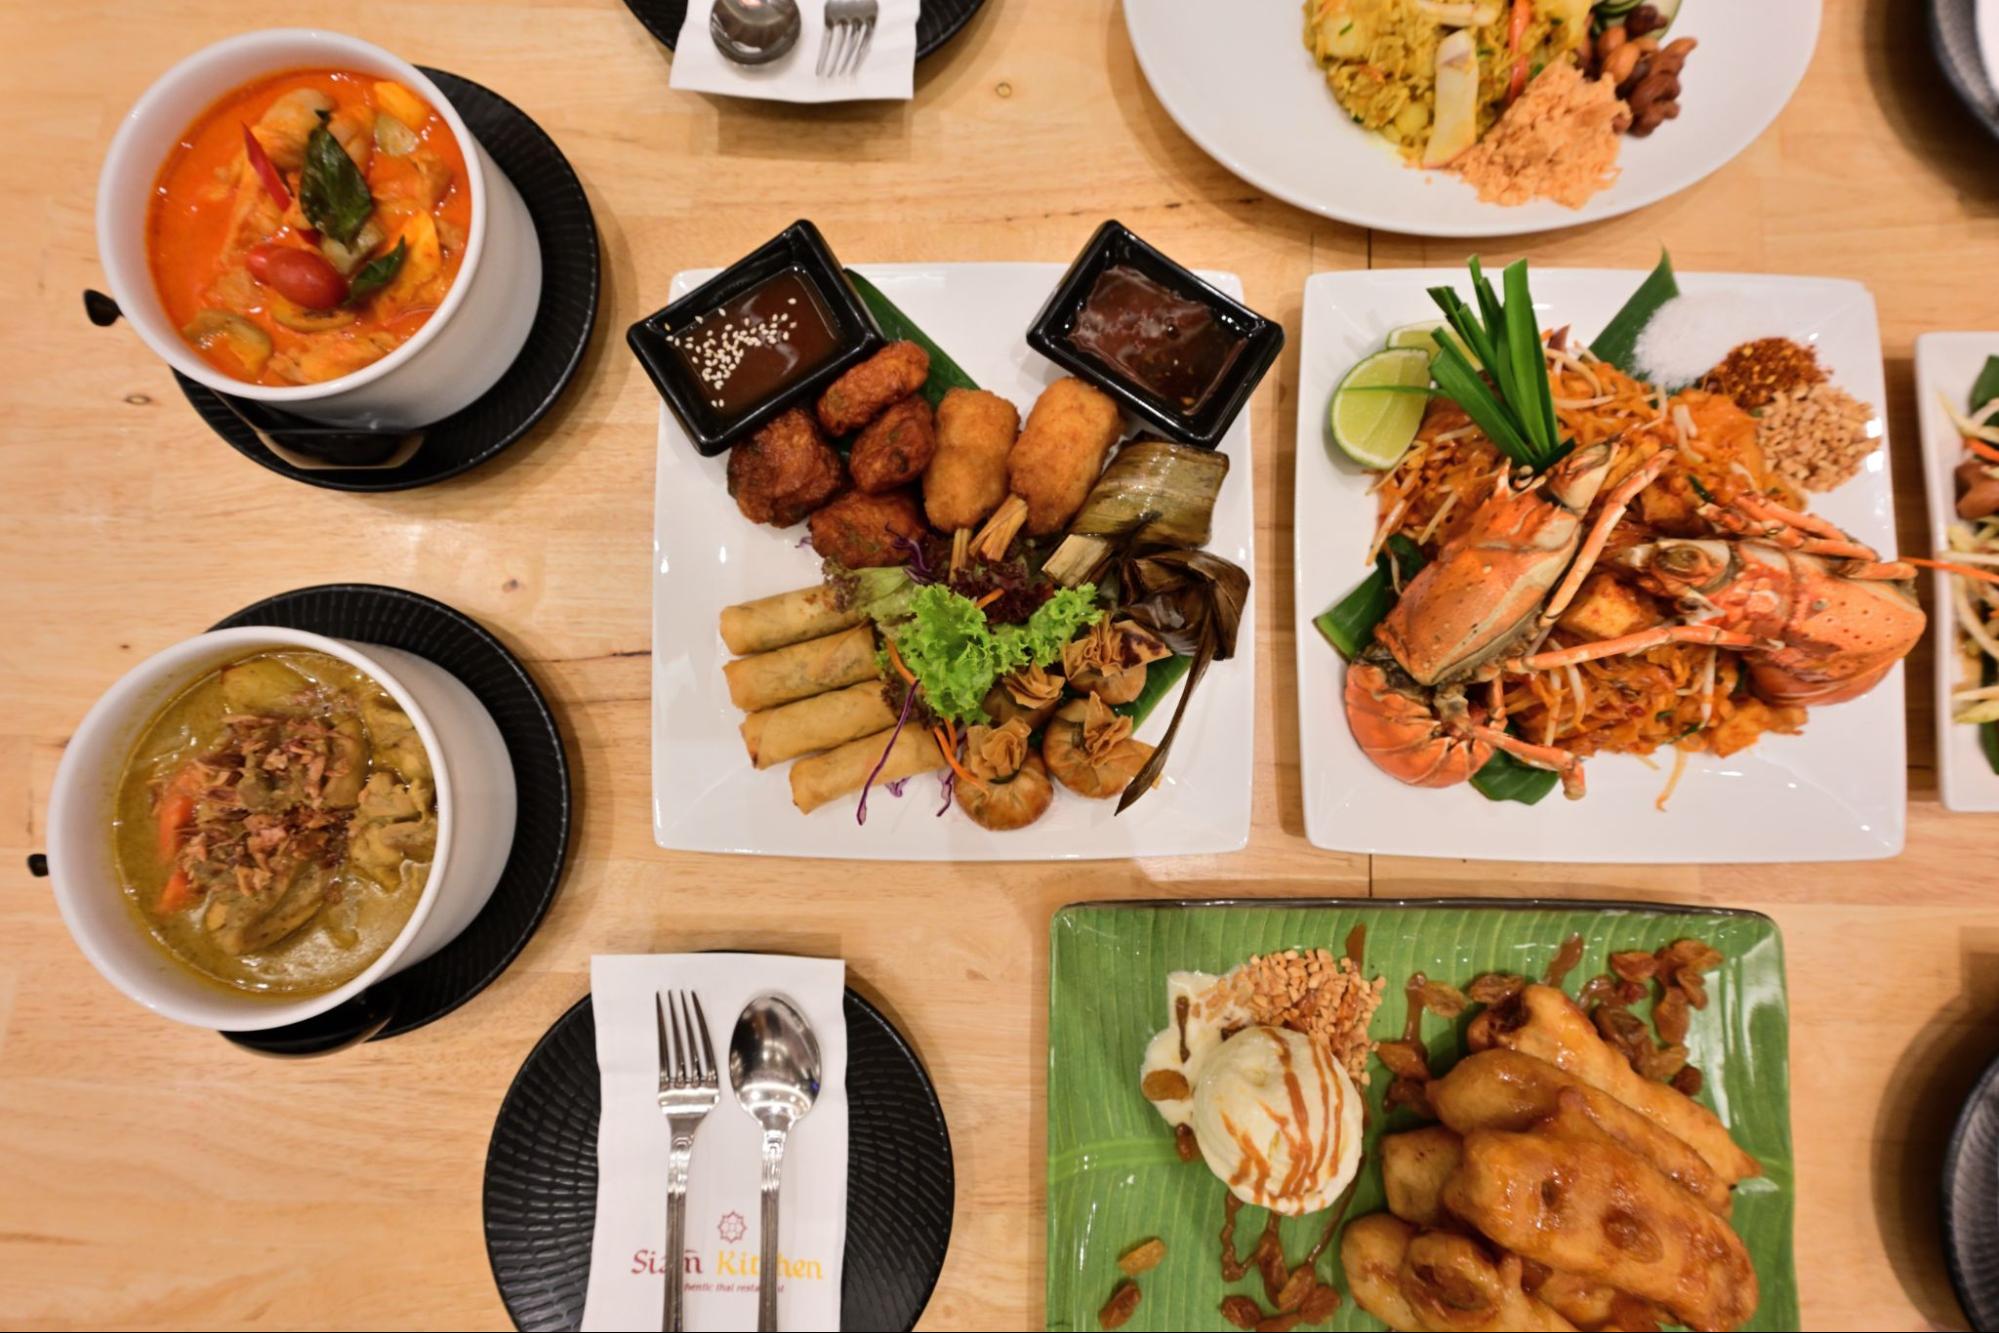 Capita3Eats Food Delivery Deals - Creative Eateries Sian Kitchen Lot One